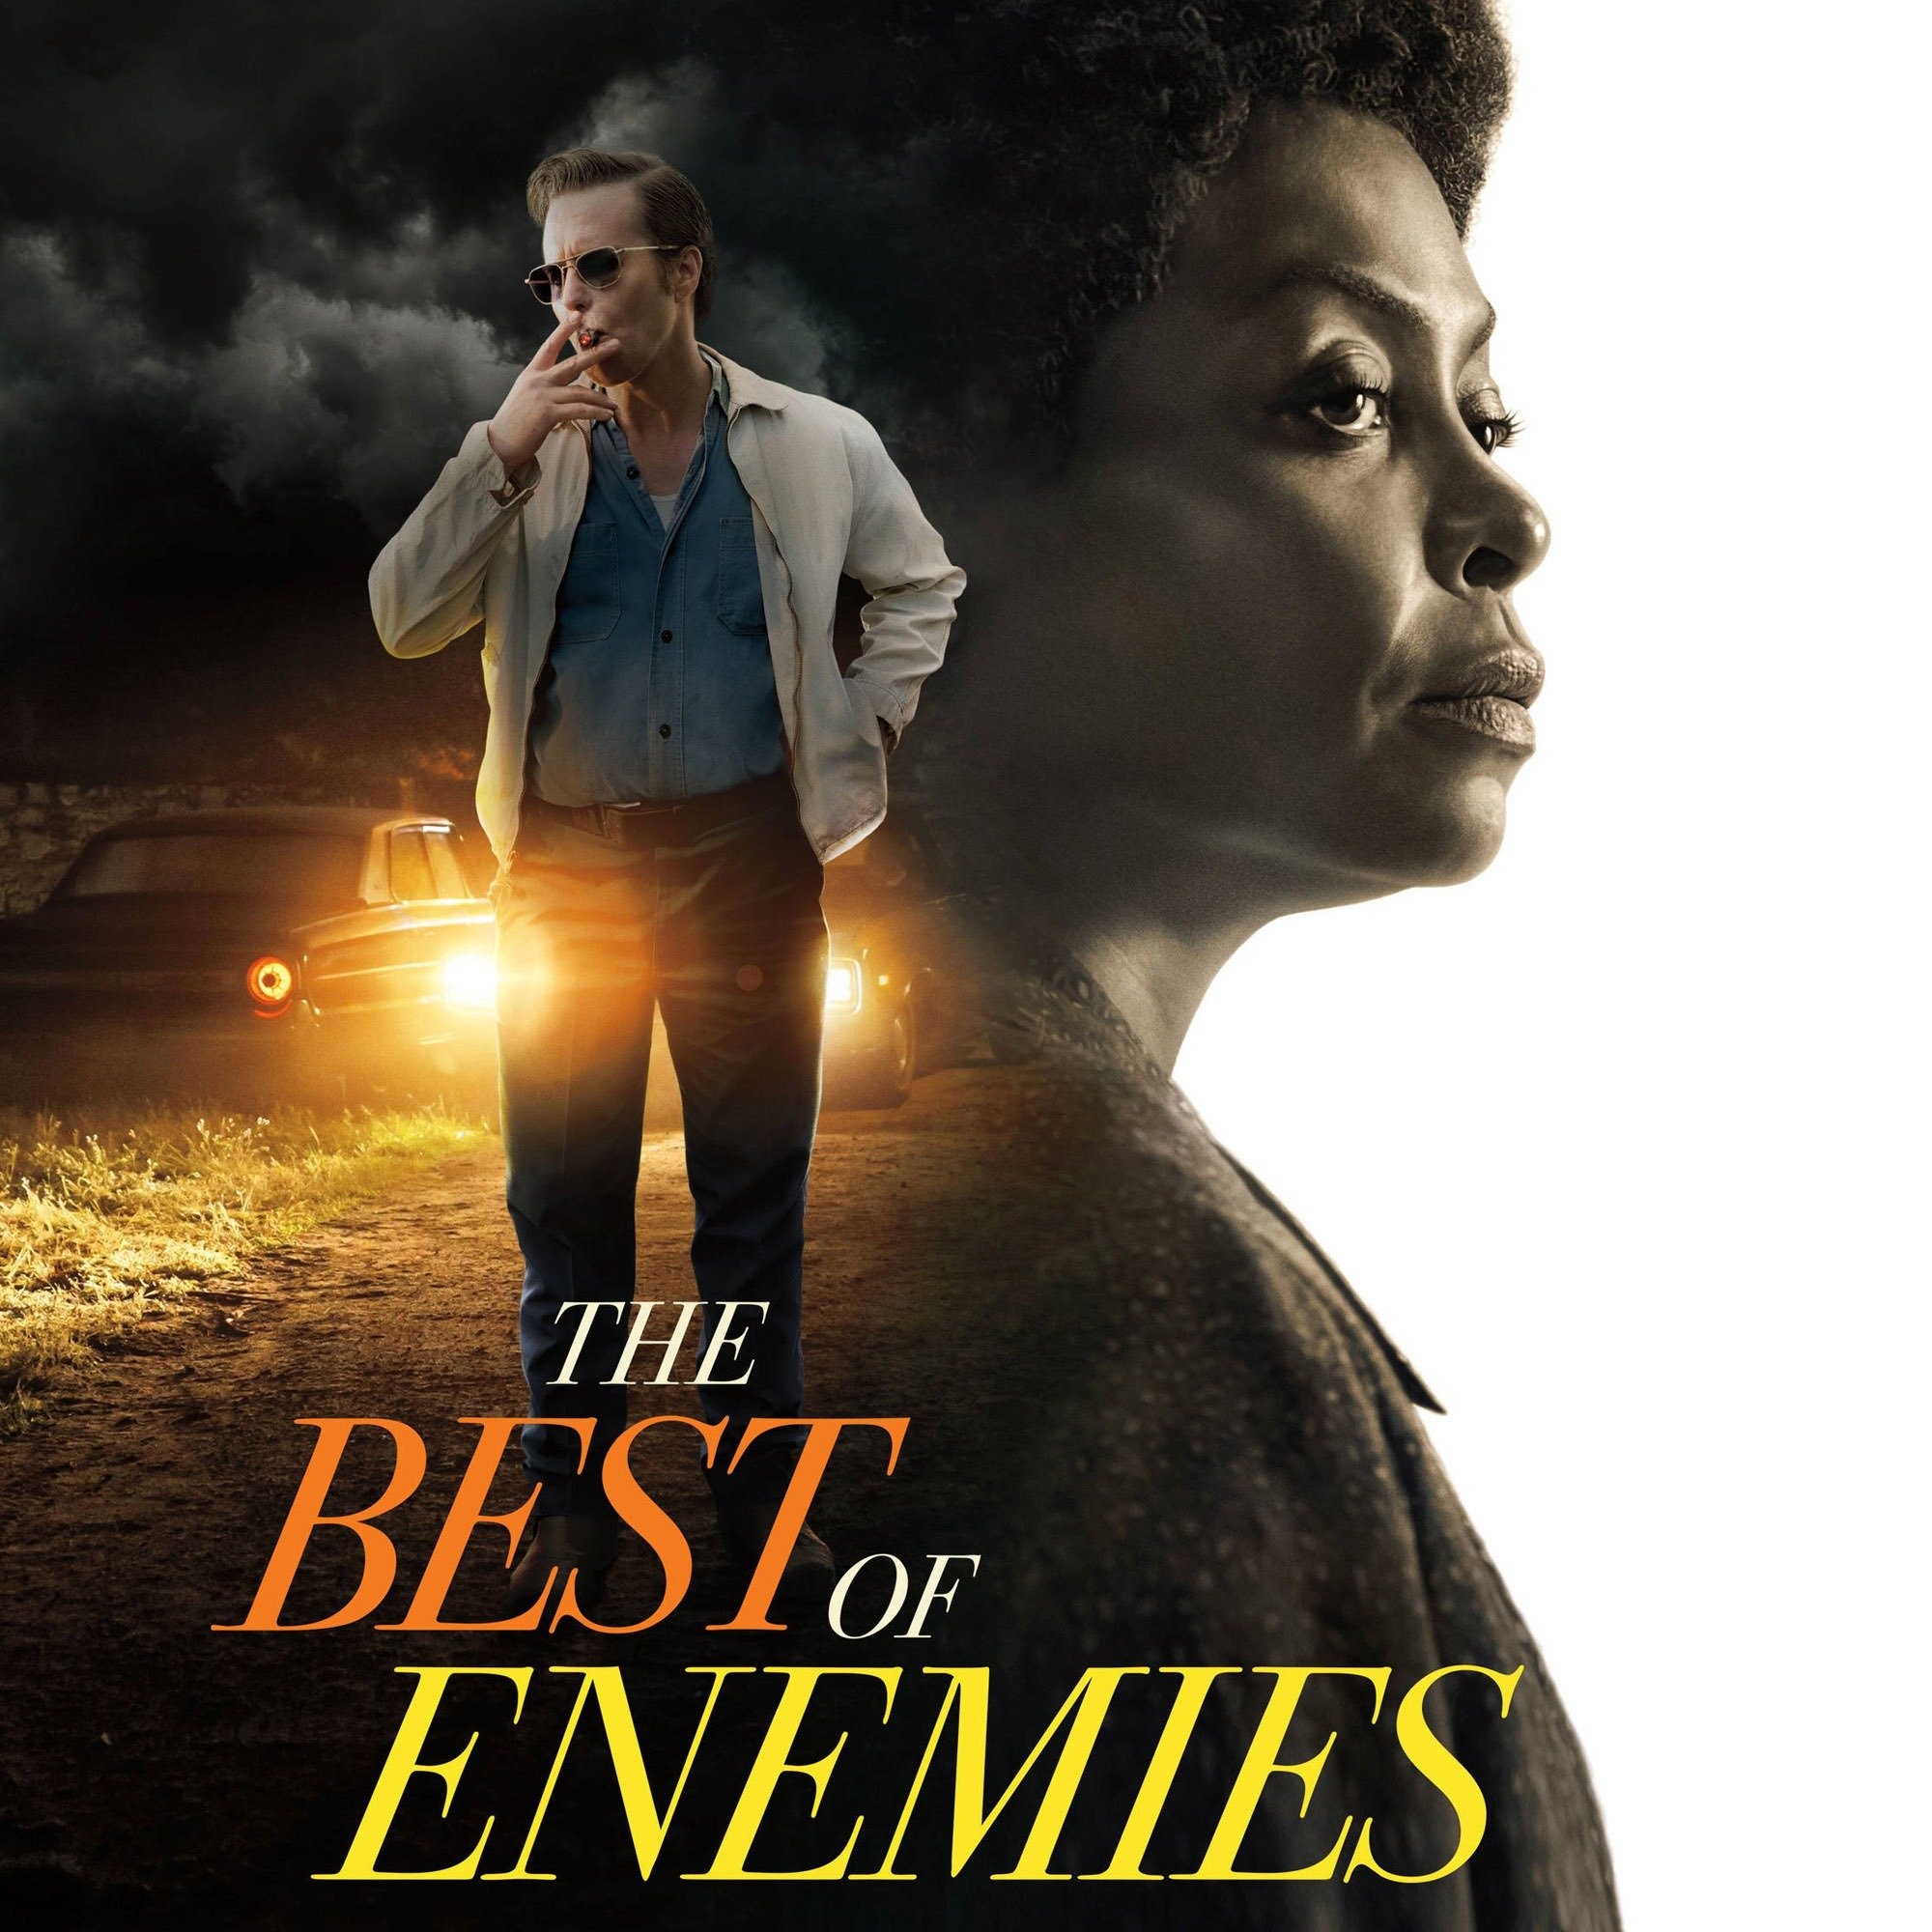 The Best of Enemies, Civil rights struggle, Unlikely friendship, Social change, 2000x2000 HD Phone